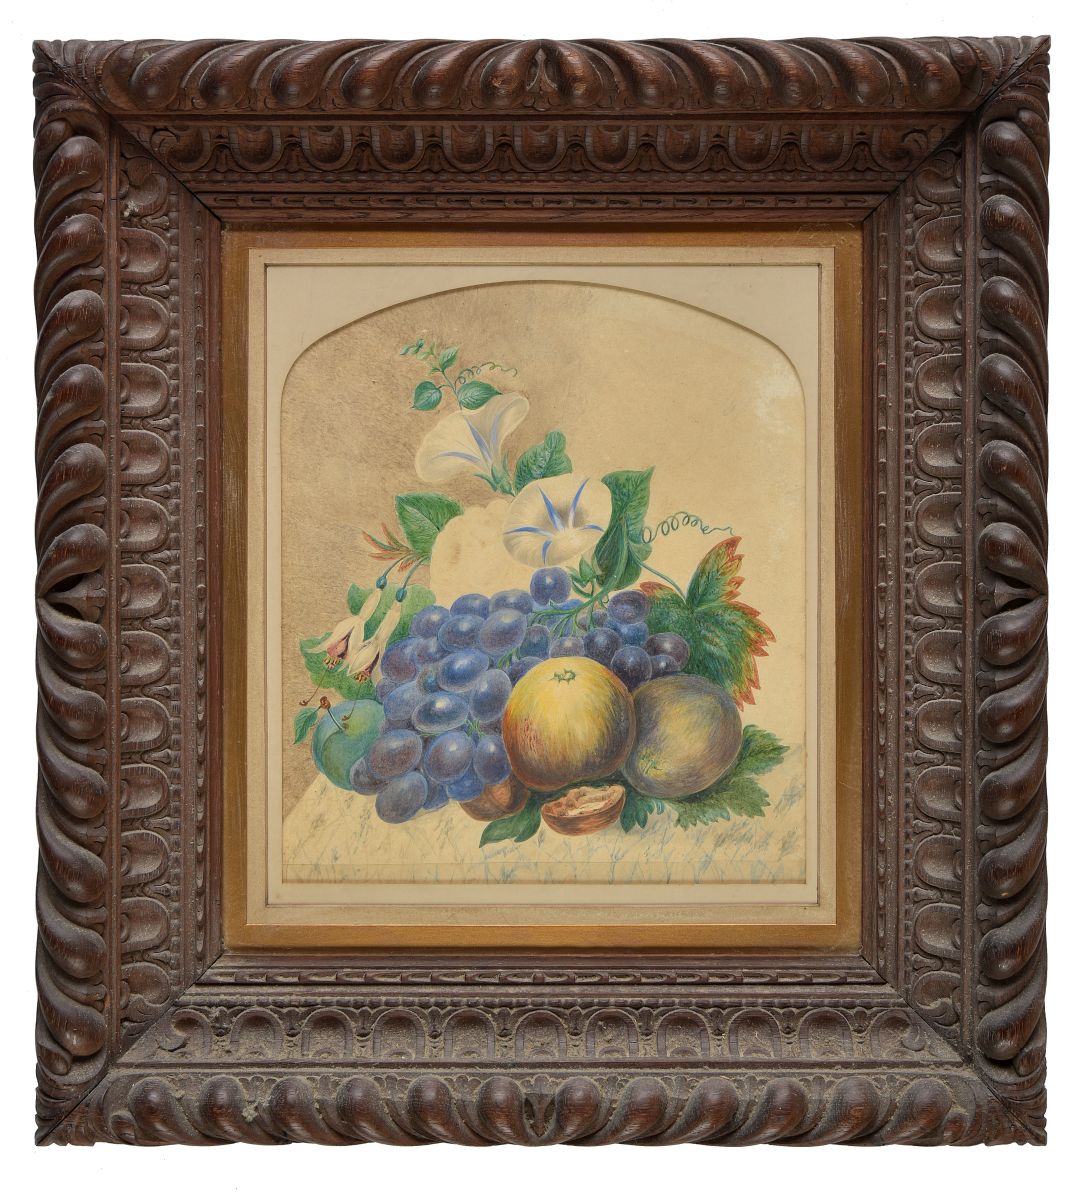 *English School. Still Lifes of fruit and flowers on a marble plinth, mid 19th century, a pair of